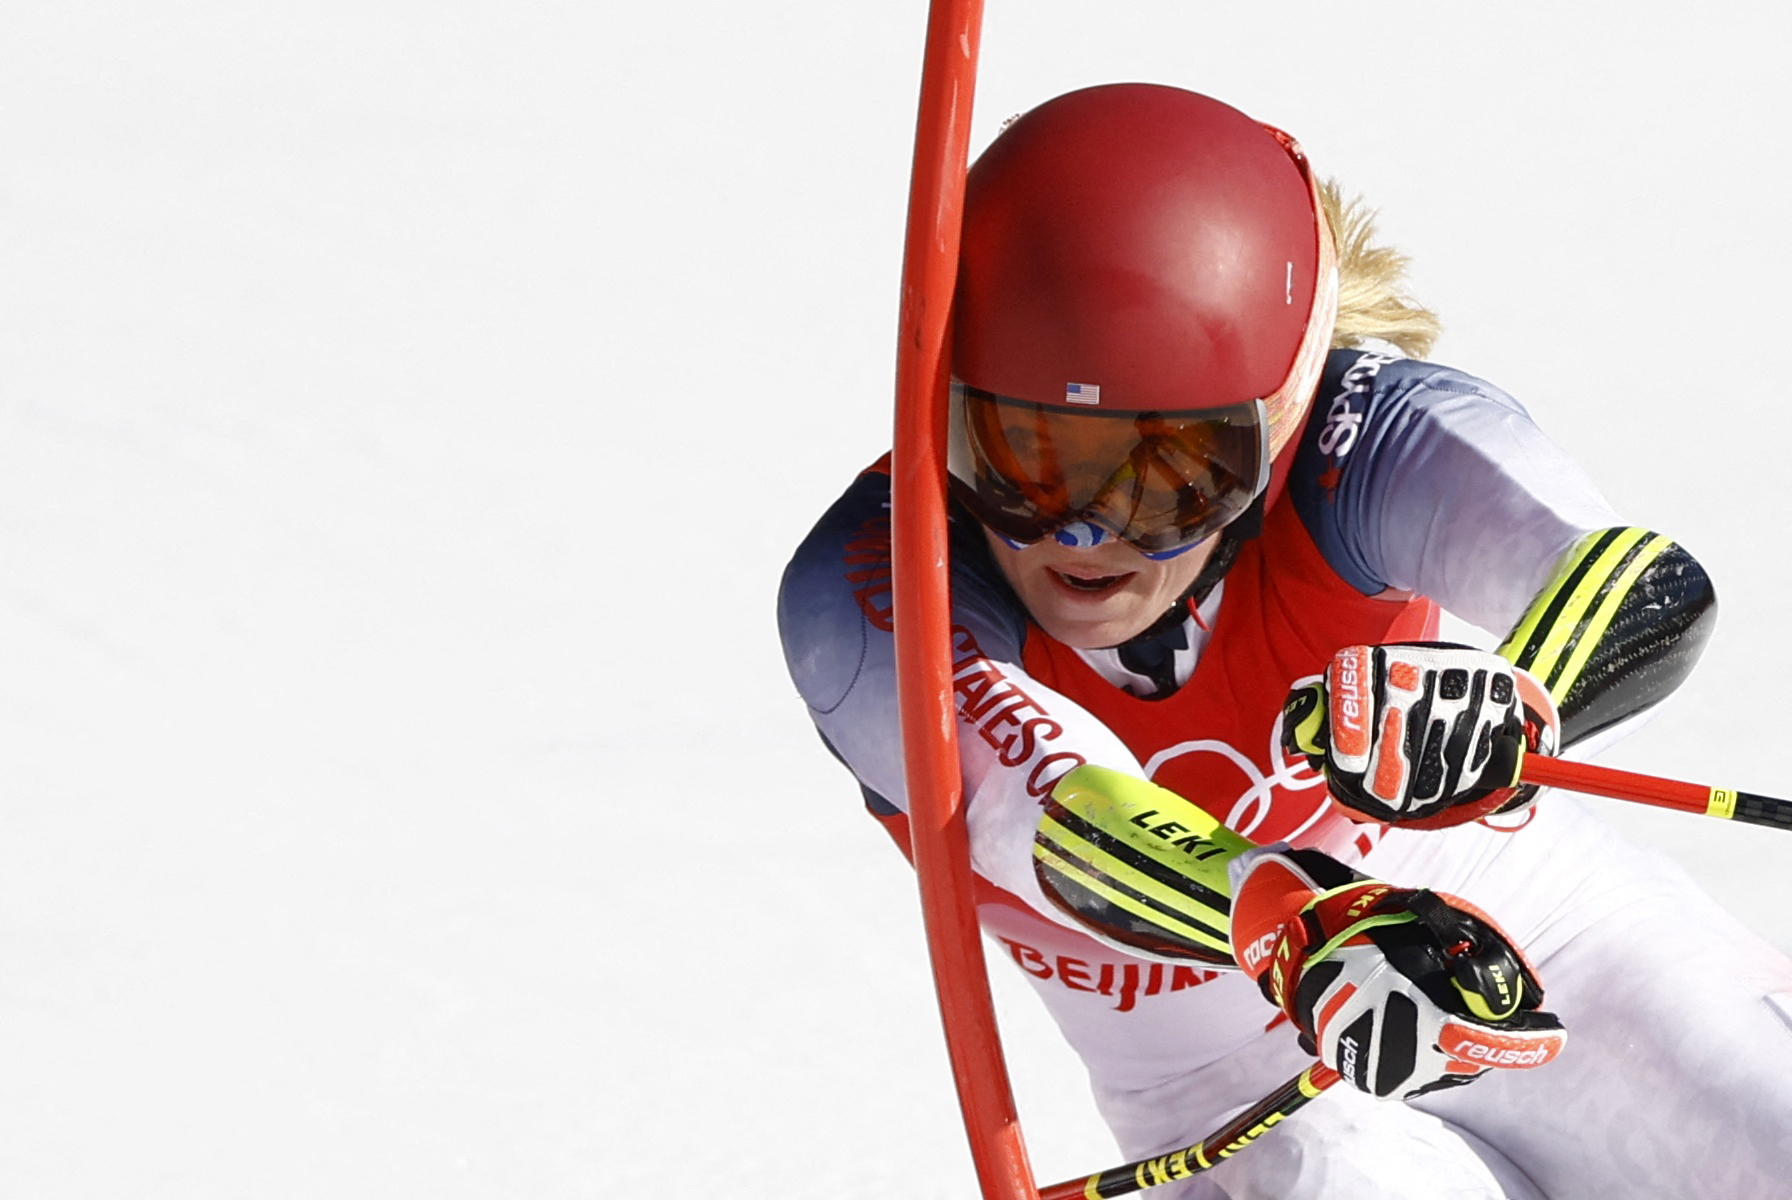 Mikaela Shiffrin leaves Beijing empty handed after failing to medal in mixed team event